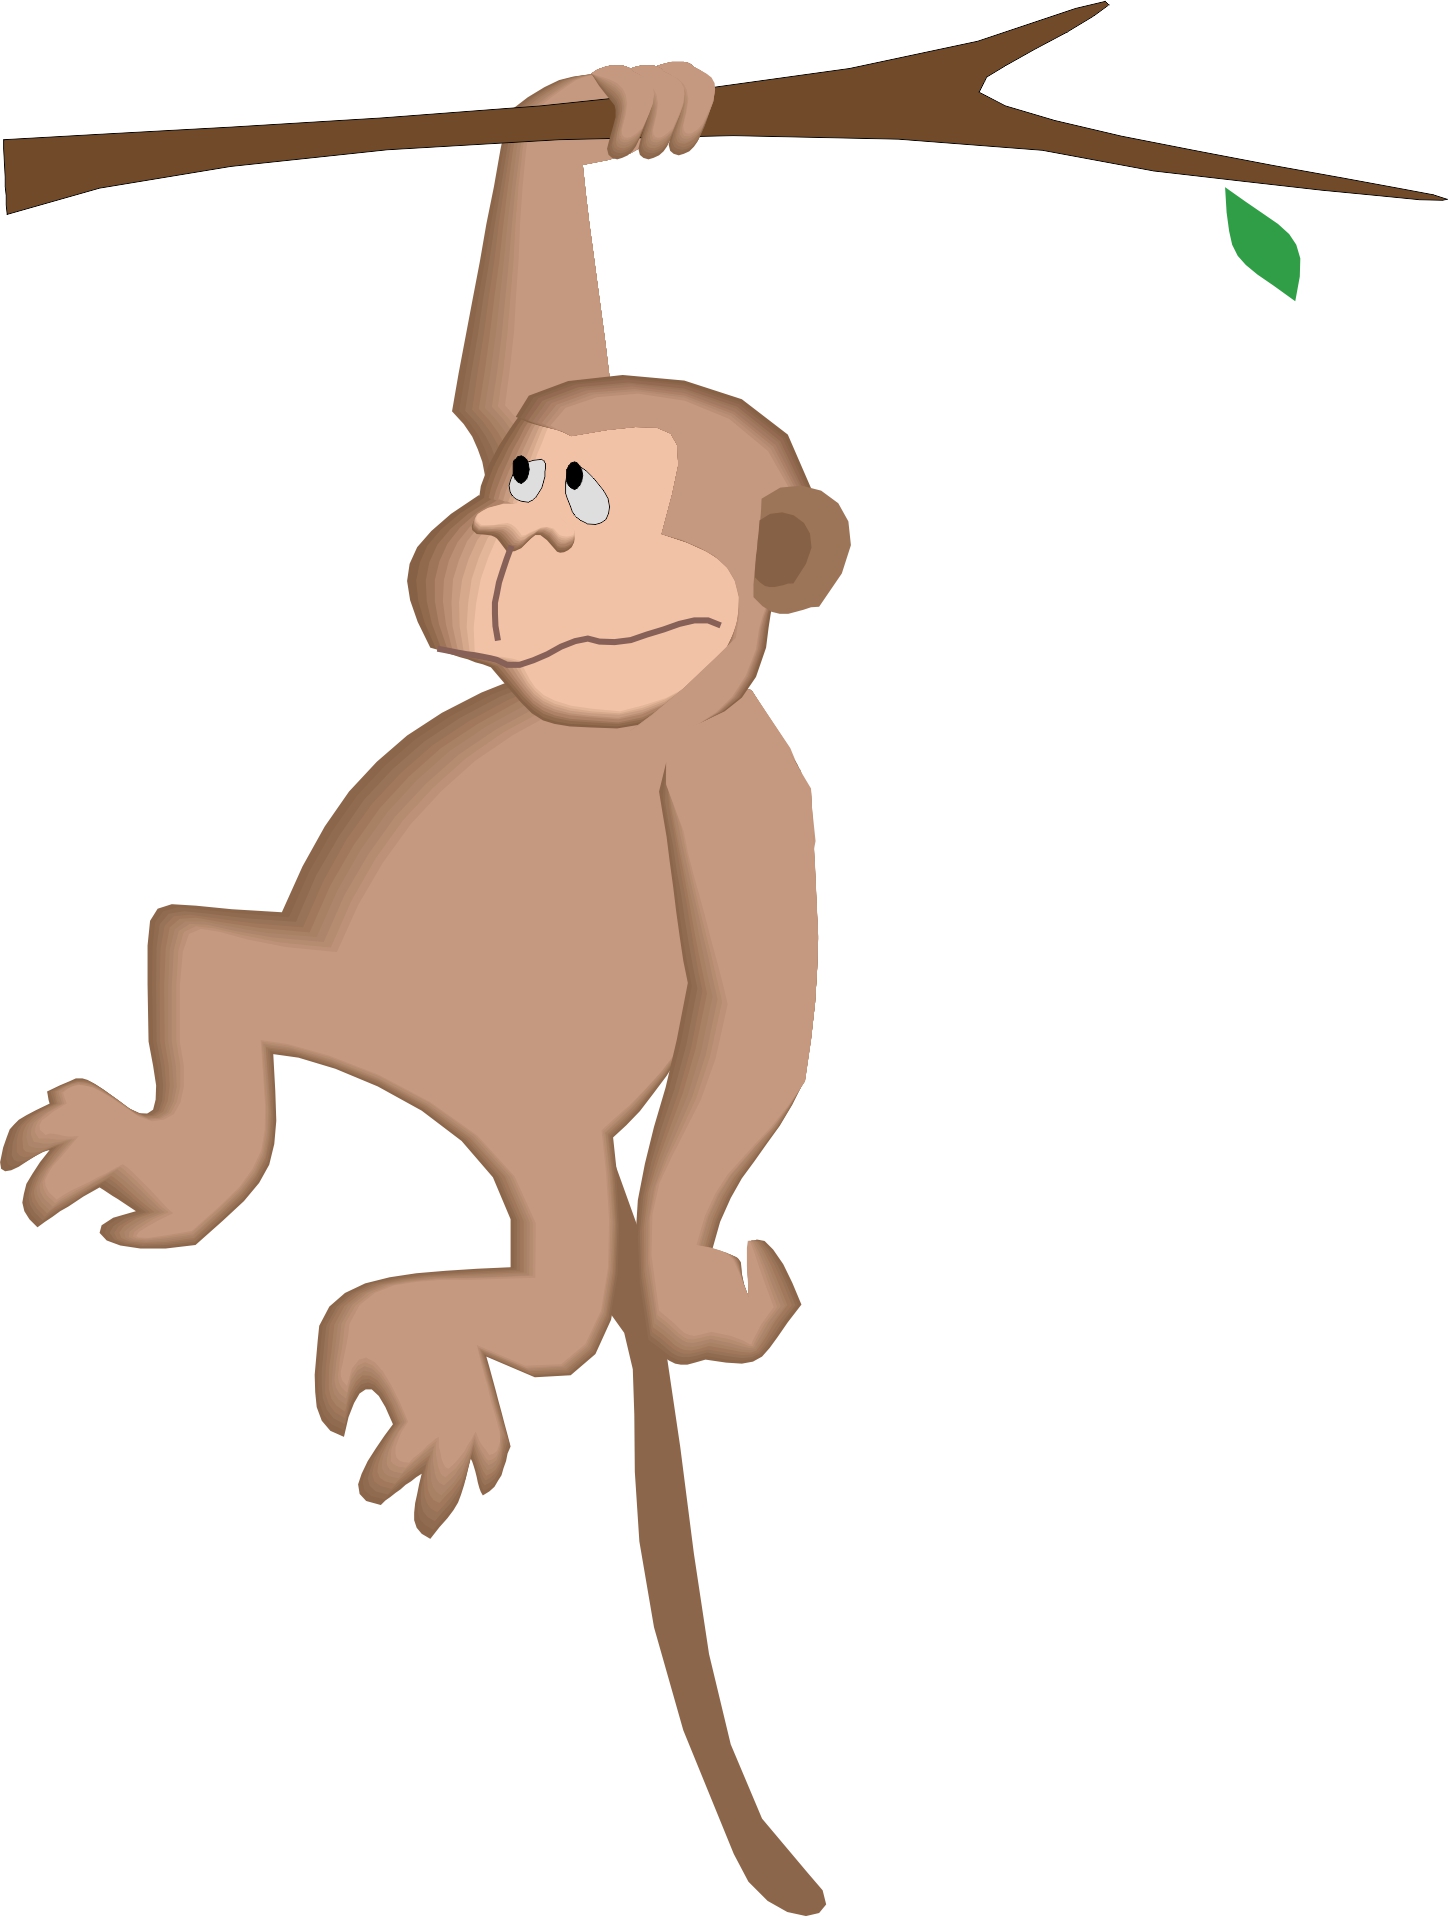 Cartoon Monkeys In Trees Images & Pictures - Becuo